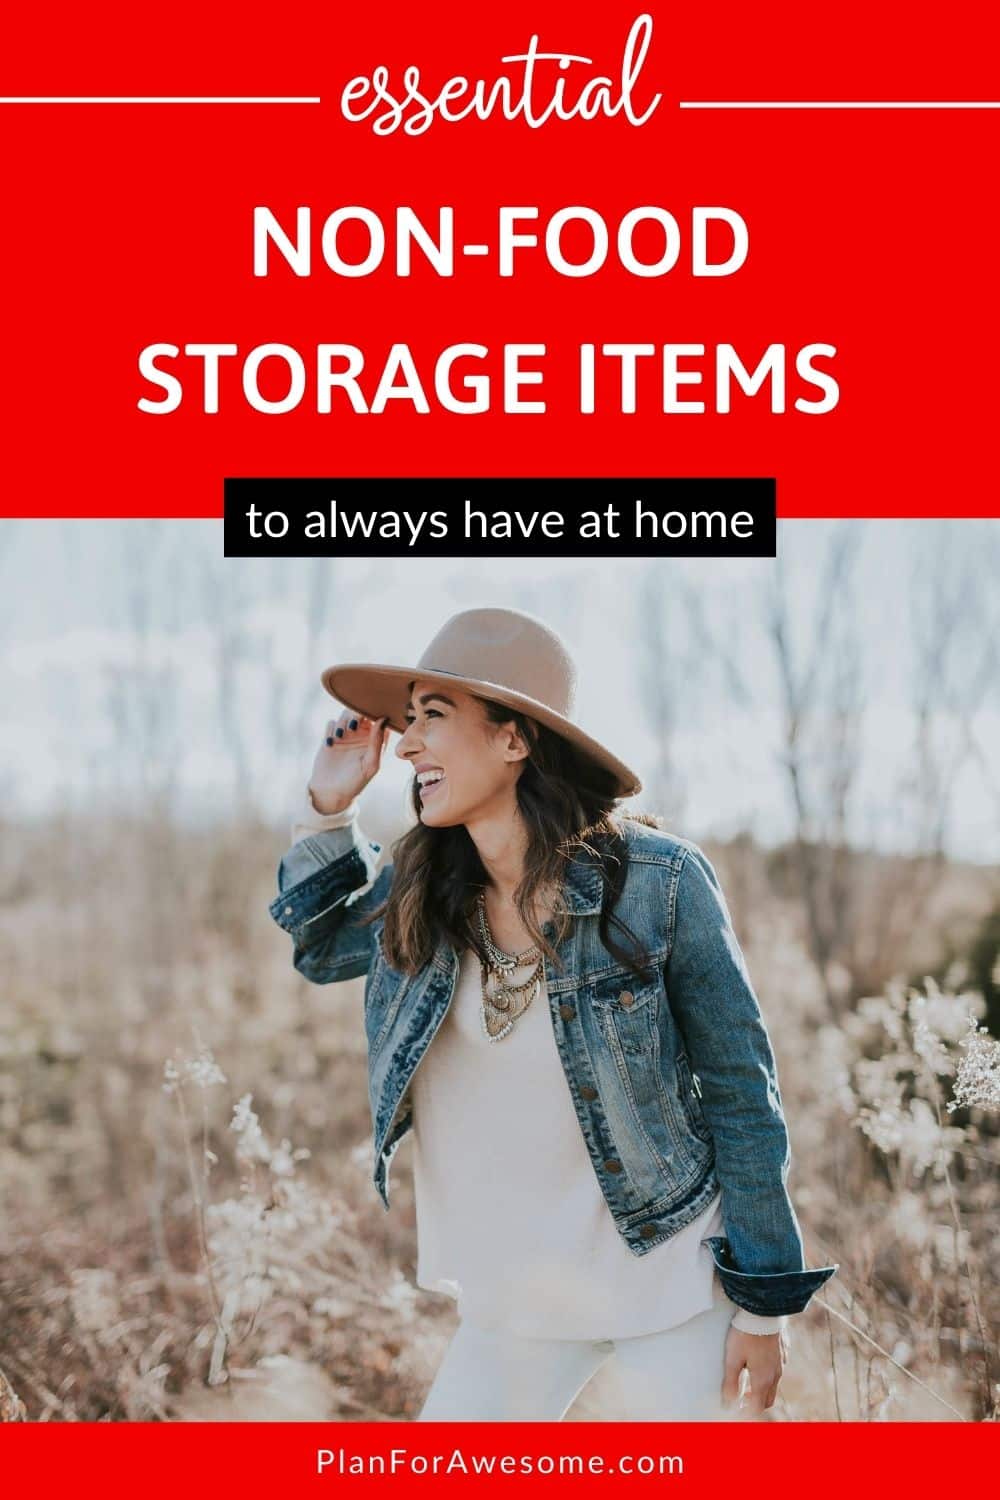 Non-food storage essentials you need to consider for your family